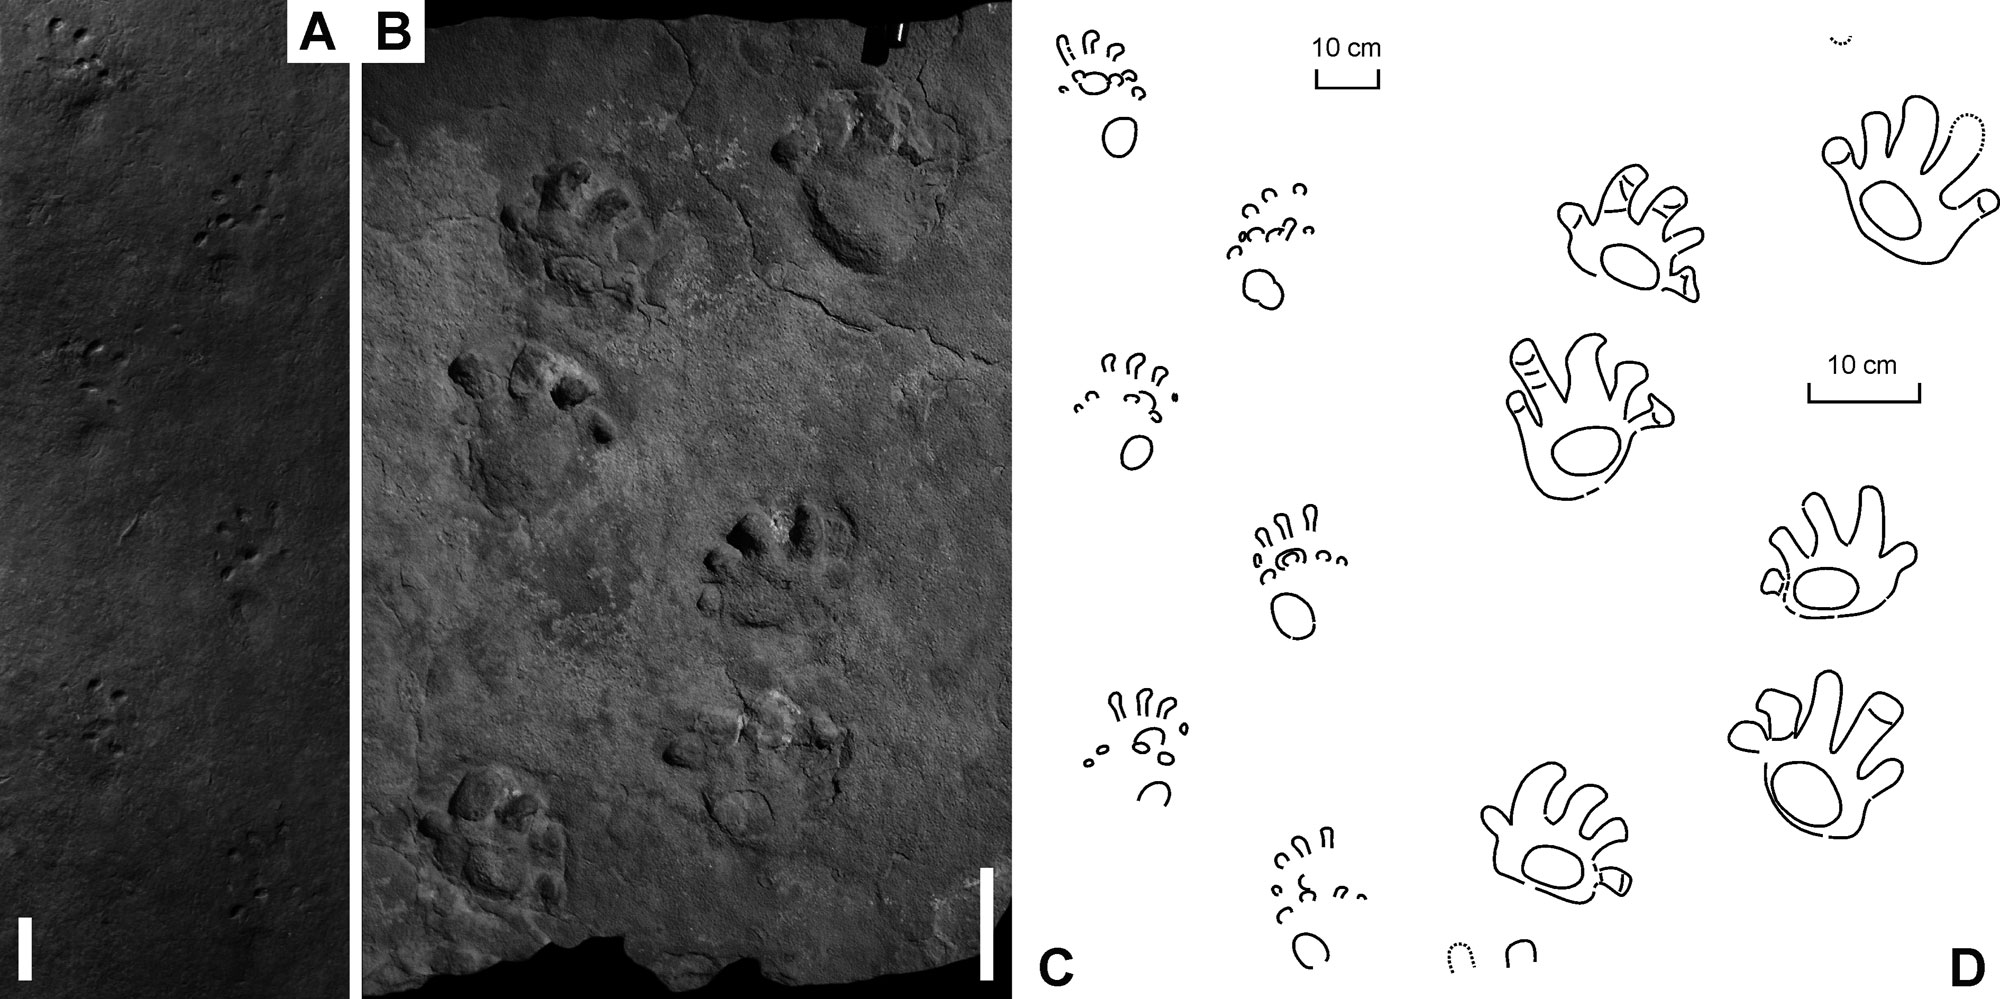 Figure from a paper showing vertebrate trackways from the Carboniferous of Ohio. At left, black and white photos show two trackways made up of multiple footprints in roughly two parallel lines. At right, there are line drawings of the same trackways.